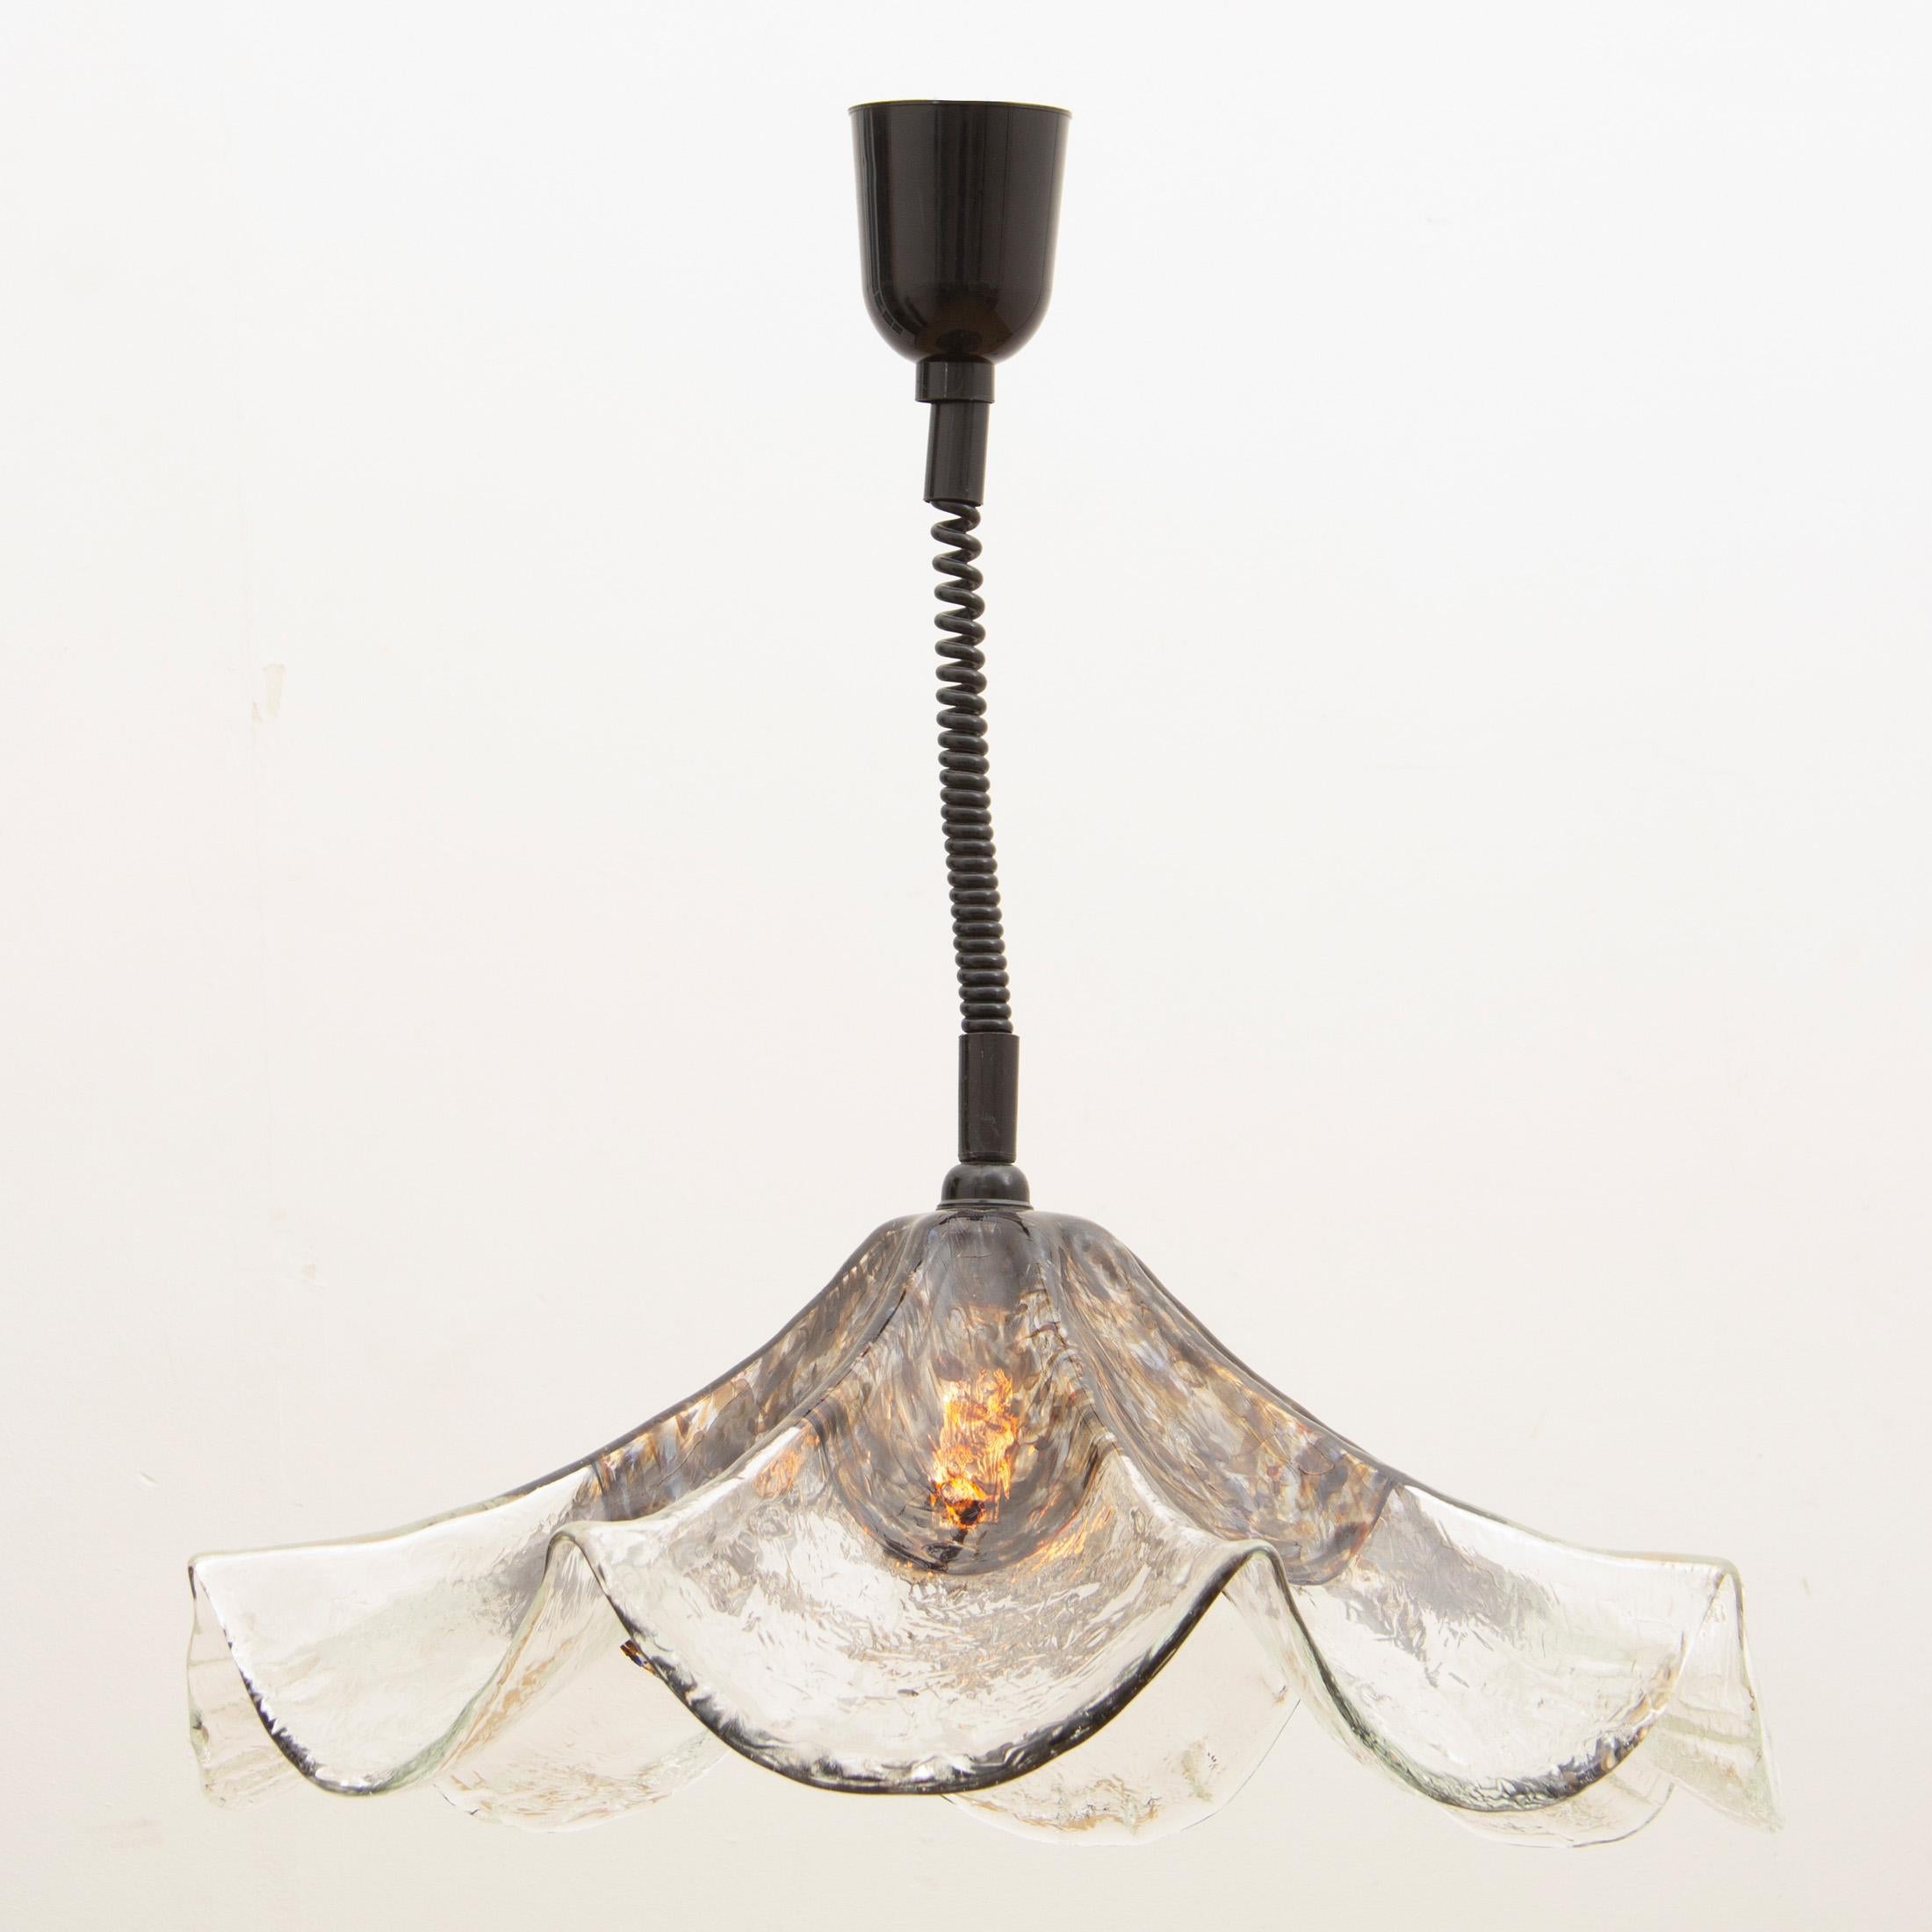 A beautiful Italian Vistosi Murano glass retractable chandelier made from one piece of hand blown glass. The chandelier can be lowered to a drop of 1m depending on your requirements. The flower shaped chandelier has a mottled black glass feature